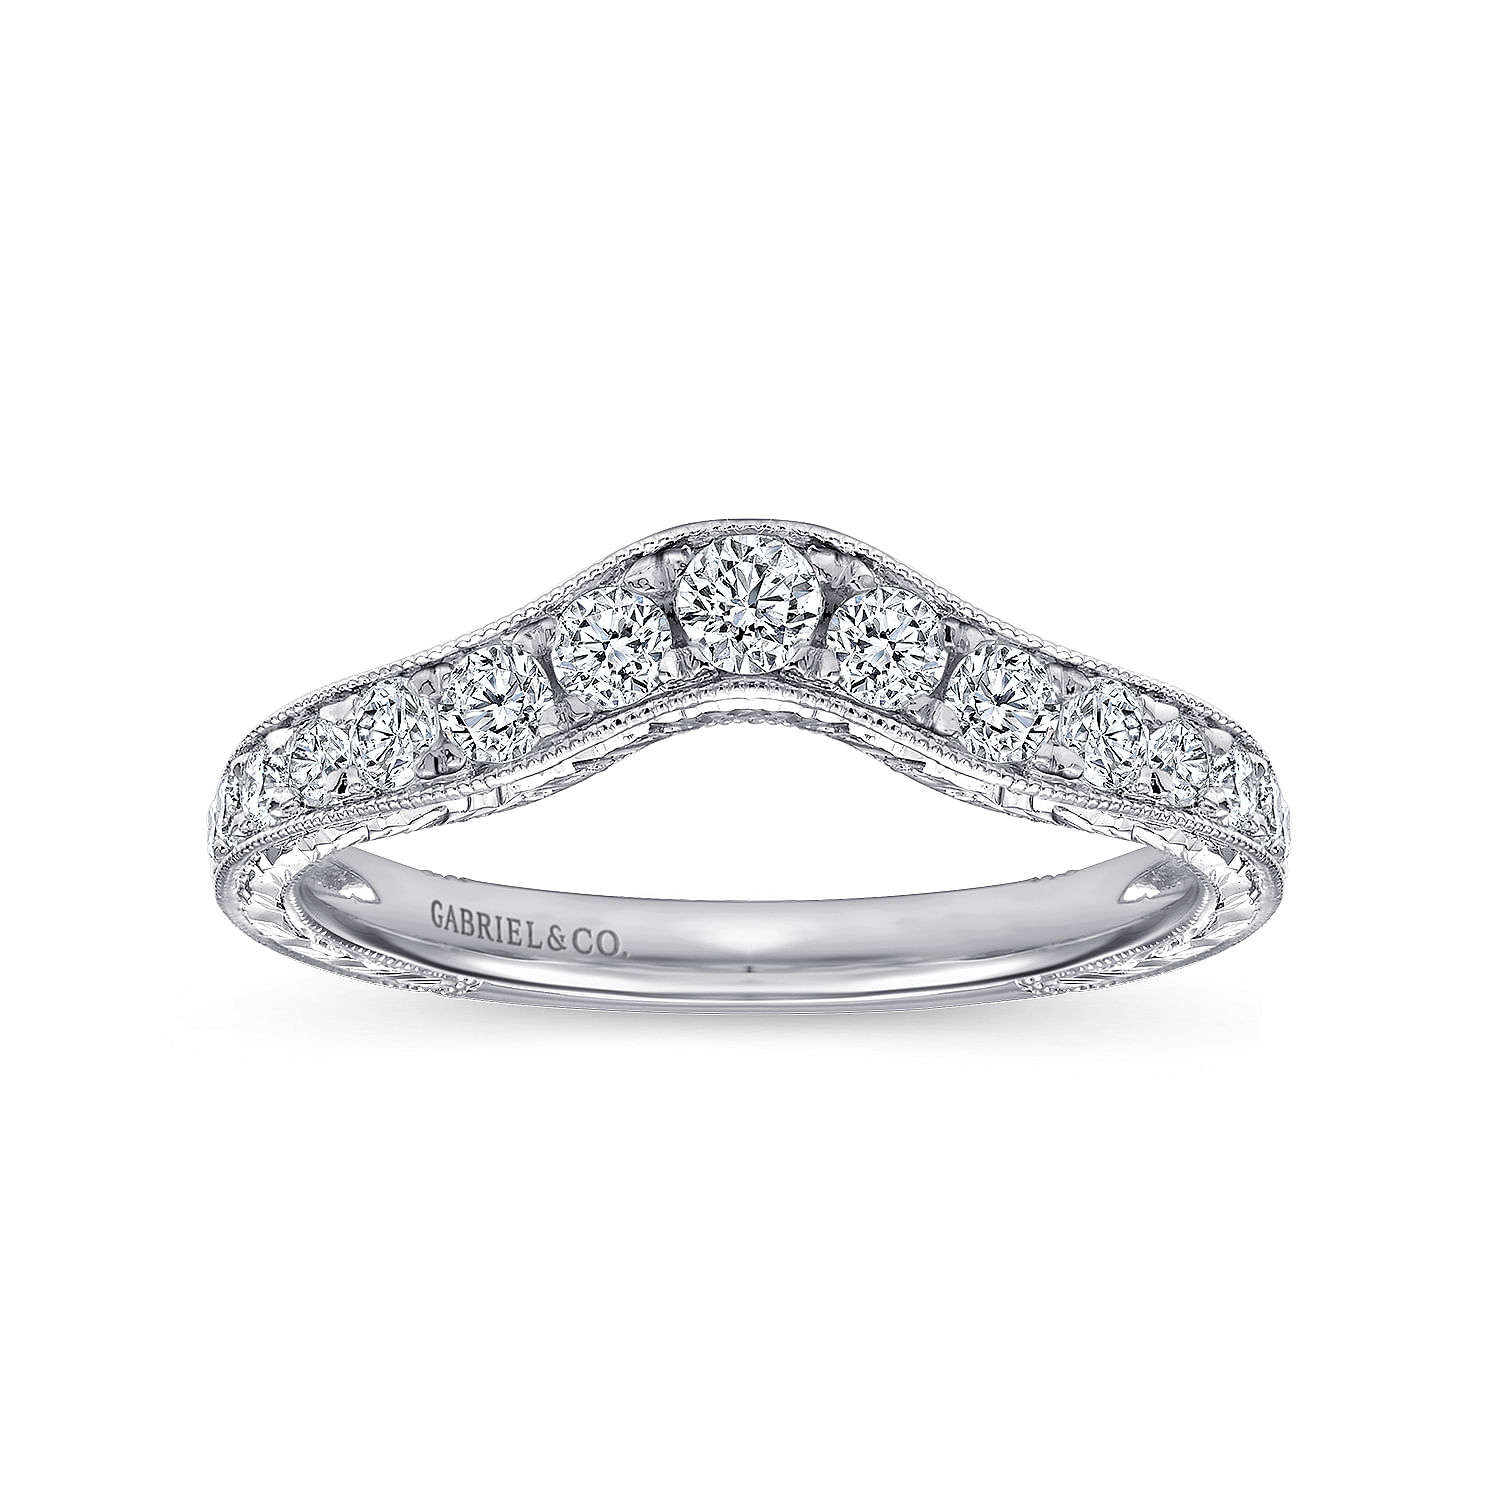 Vintage Inspired  Curved 14K White Gold Micro Pave Diamond Wedding Band with Engraving - 0.5 ct - Shot 4